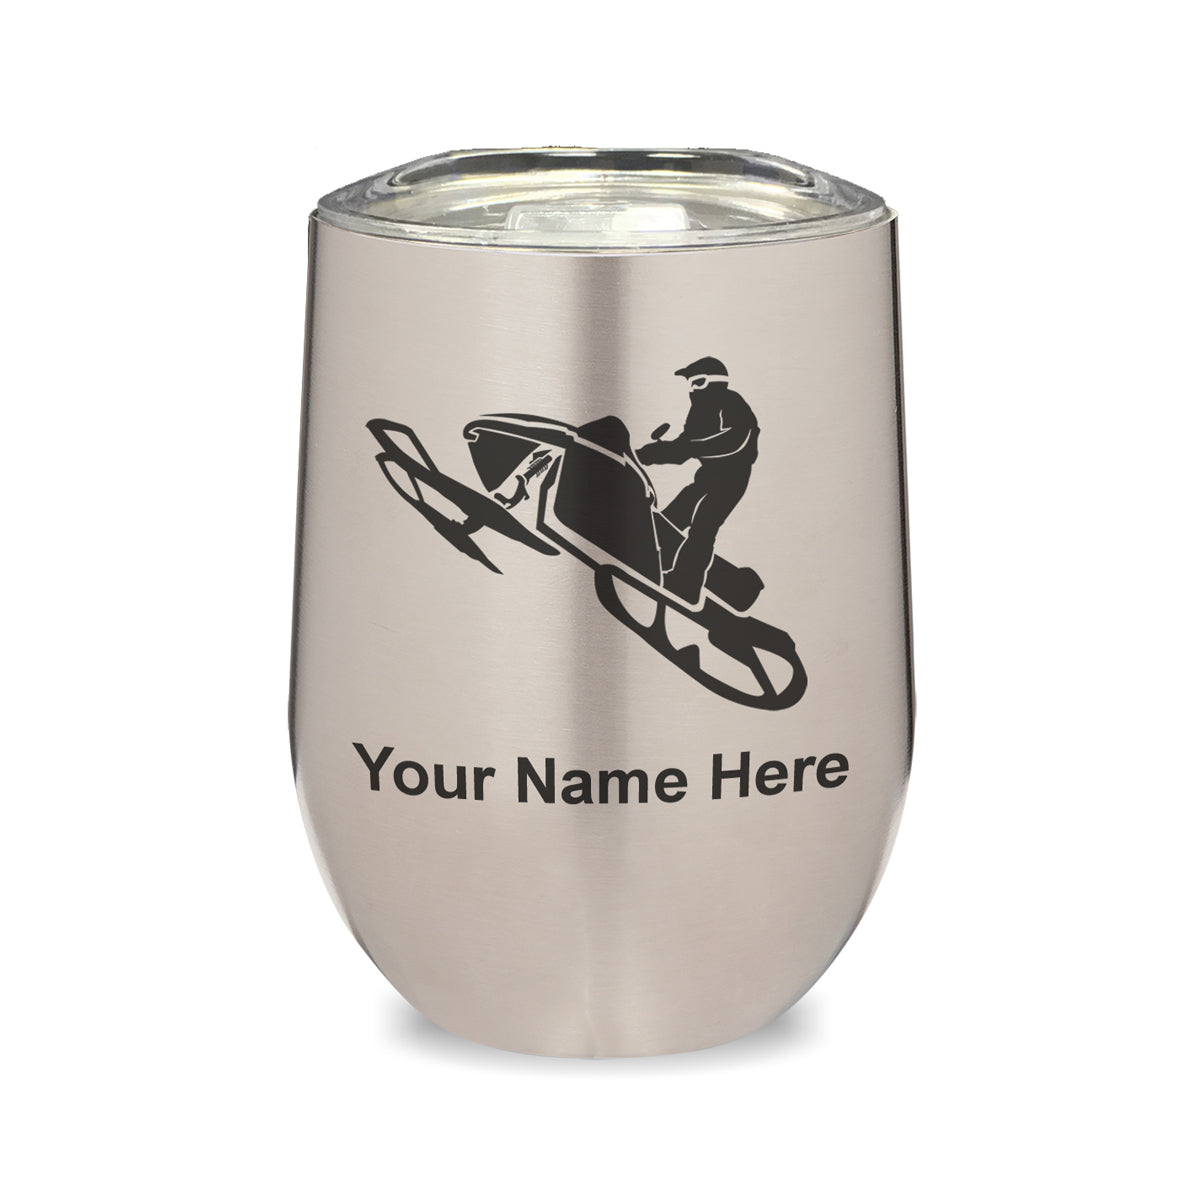 LaserGram Double Wall Stainless Steel Wine Glass, Snowmobile, Personalized Engraving Included